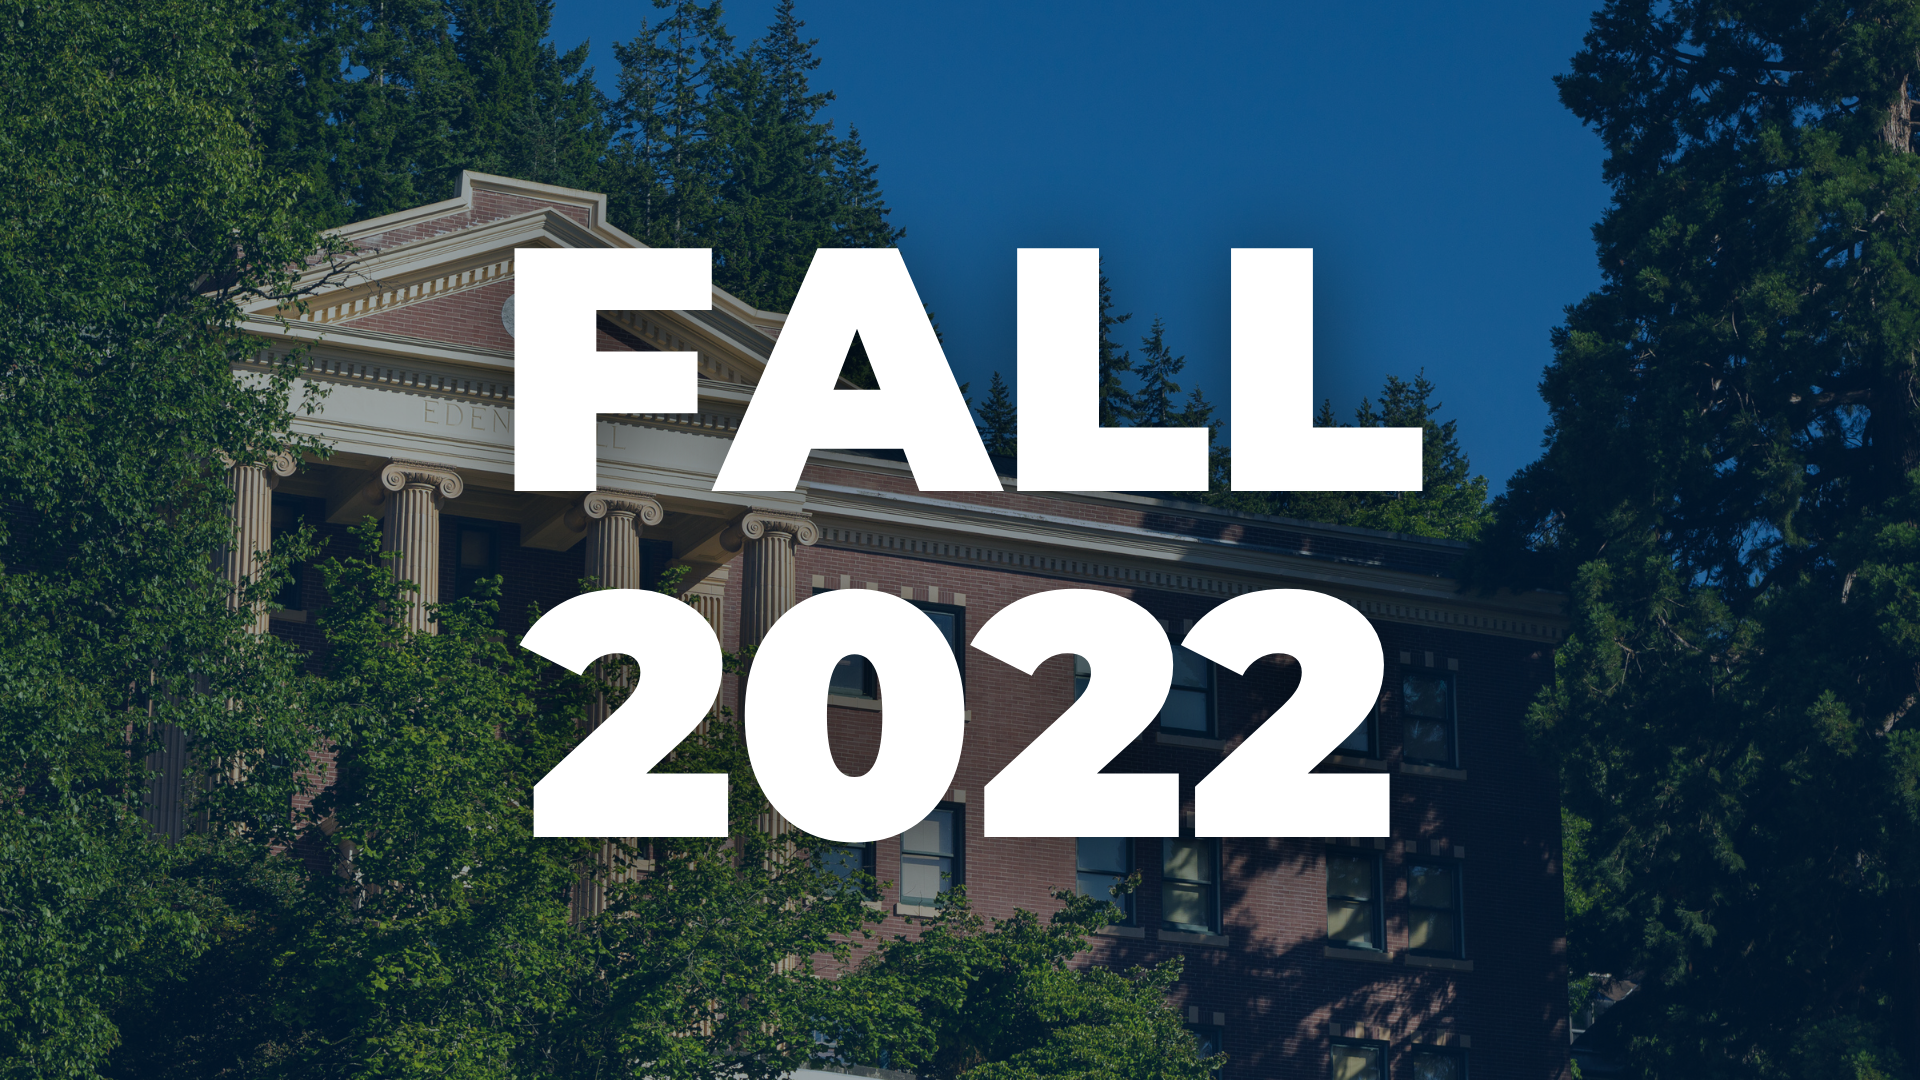 "Fall 2022" is printed over an image of Edens Hall